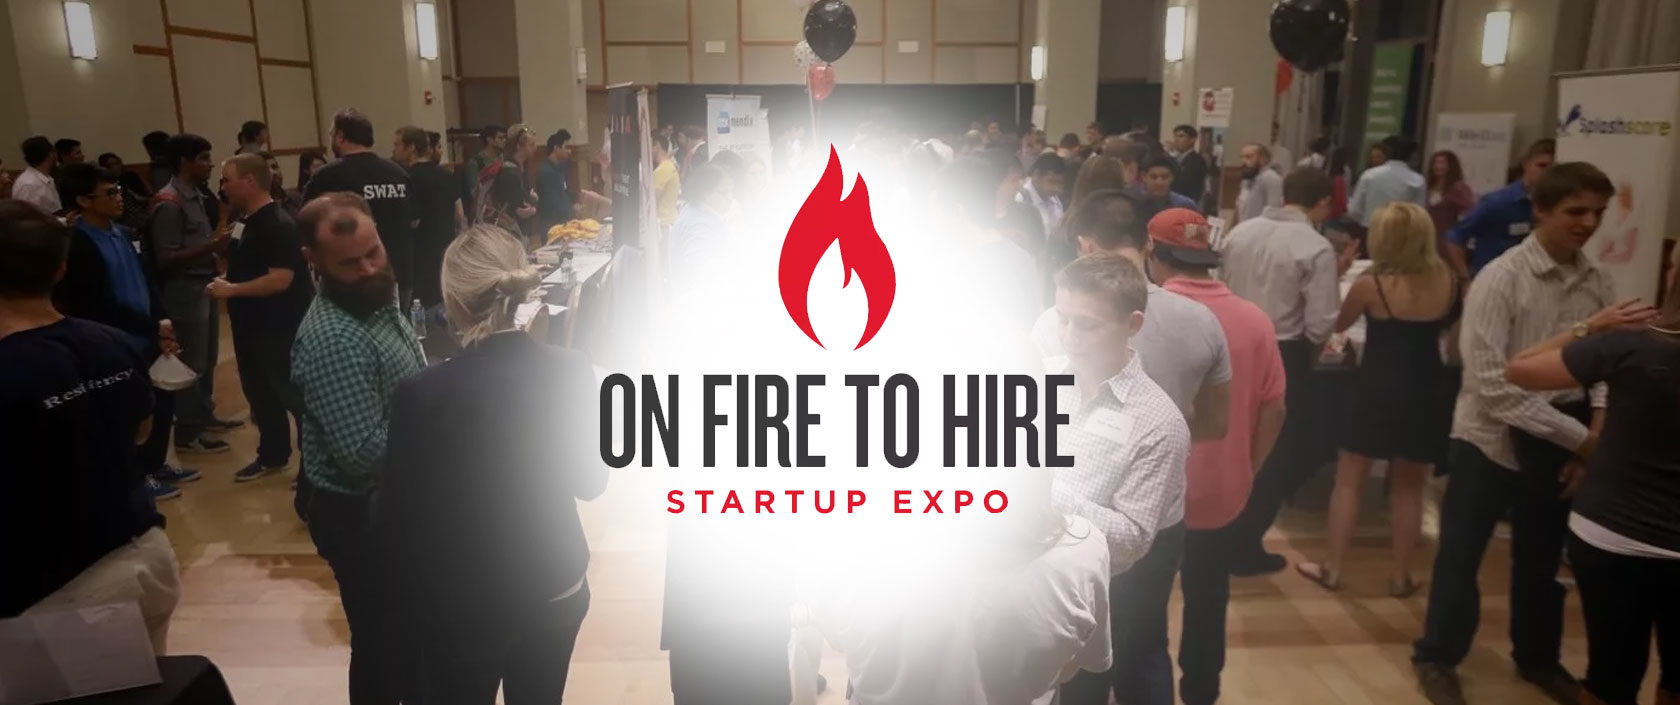 On Fire to Hire